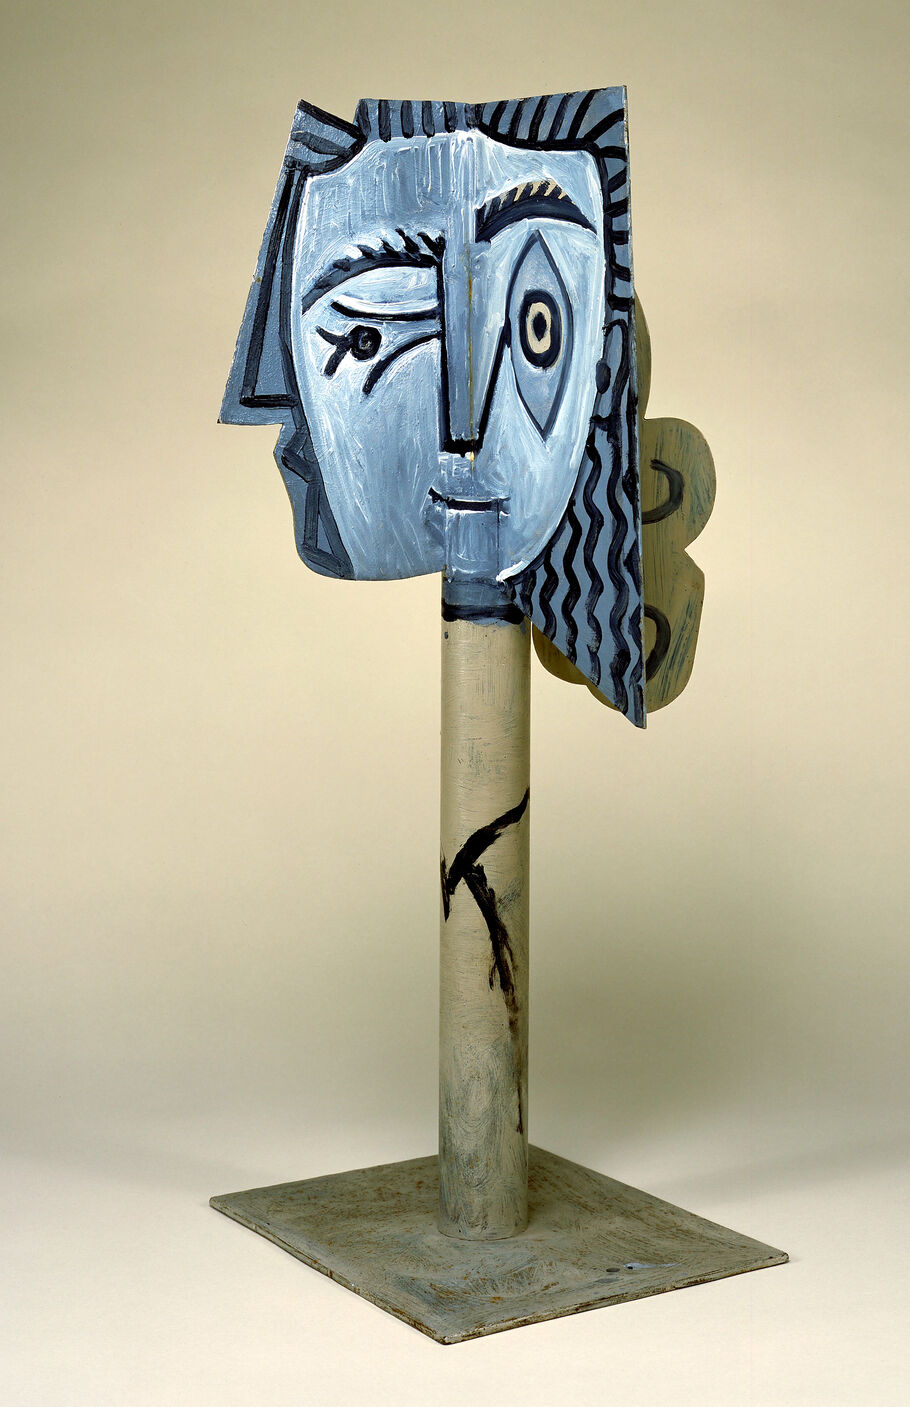 Picasso's Head of a Woman: From Steel to Concrete